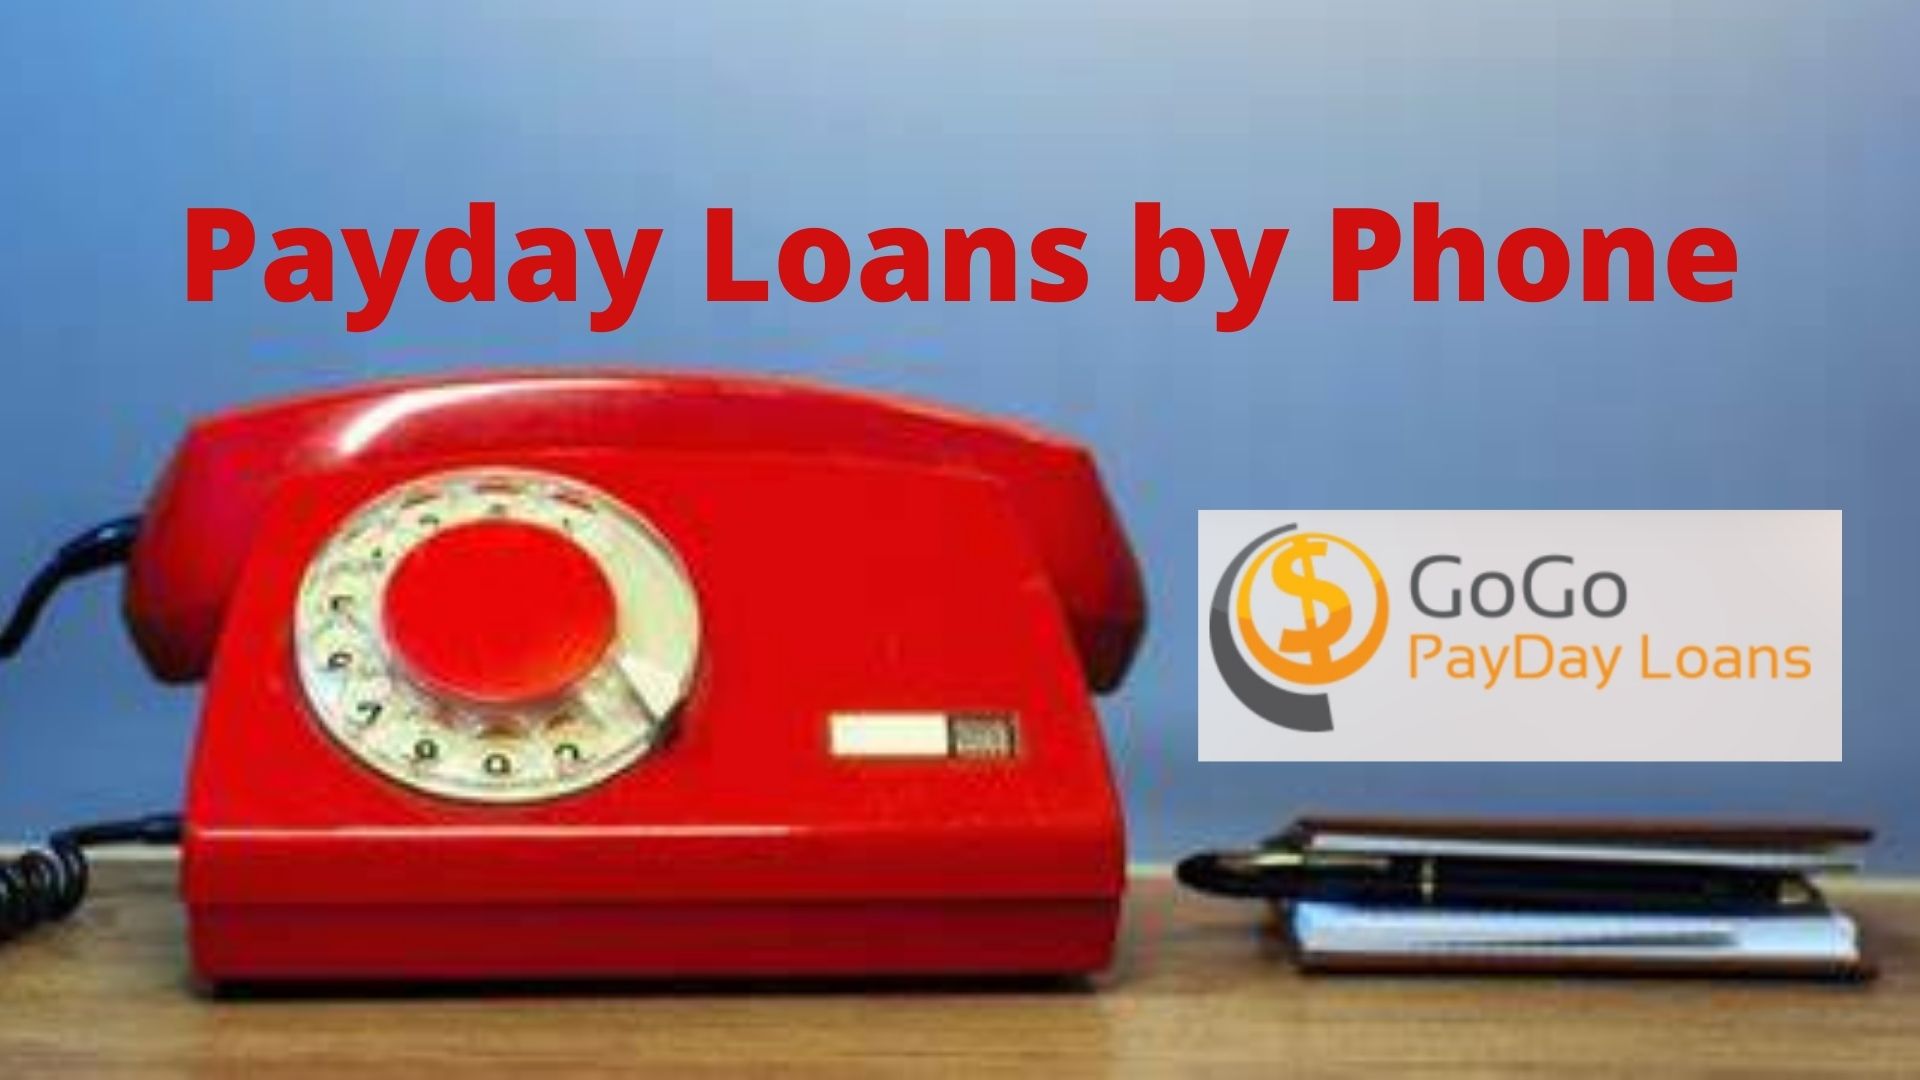 Payday Loans by phone